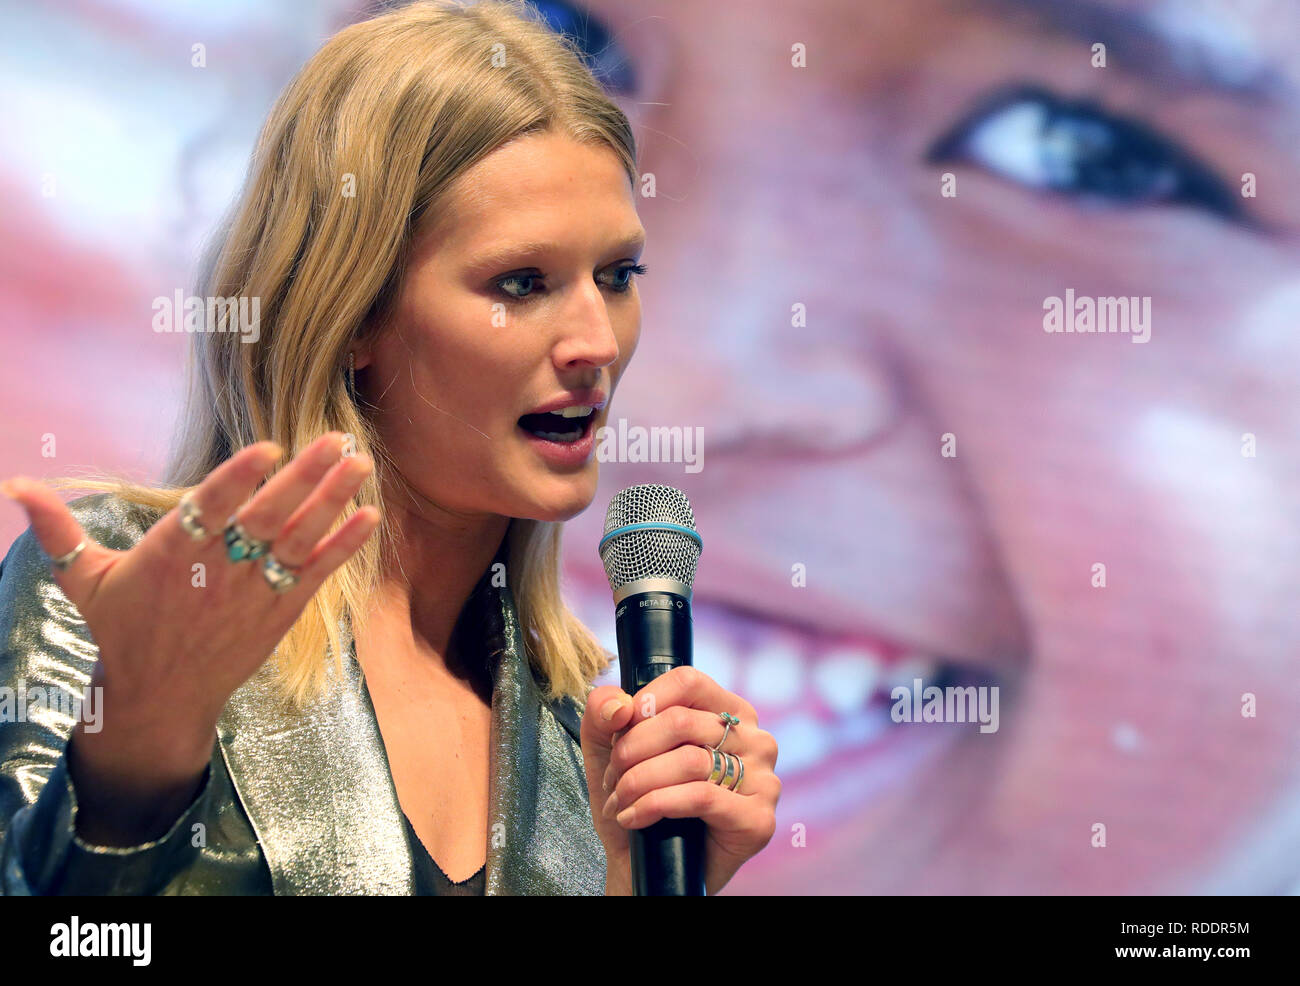 Berlin, Germany. 18th Jan, 2019. Photomodel Toni Garrn takes part in an event at the International Green Week under the motto: 'EINEWELT ohne Hunger ist möglich - mit fairem Einkauf und fairer Produktion' ('ONE World without Hunger is Possible - with Fair Shopping and Fair Production'). The fair for food, agriculture and horticulture took place for the first time in Berlin in 1926. The partner country this year is Finland. Credit: Wolfgang Kumm/dpa/Alamy Live News Stock Photo